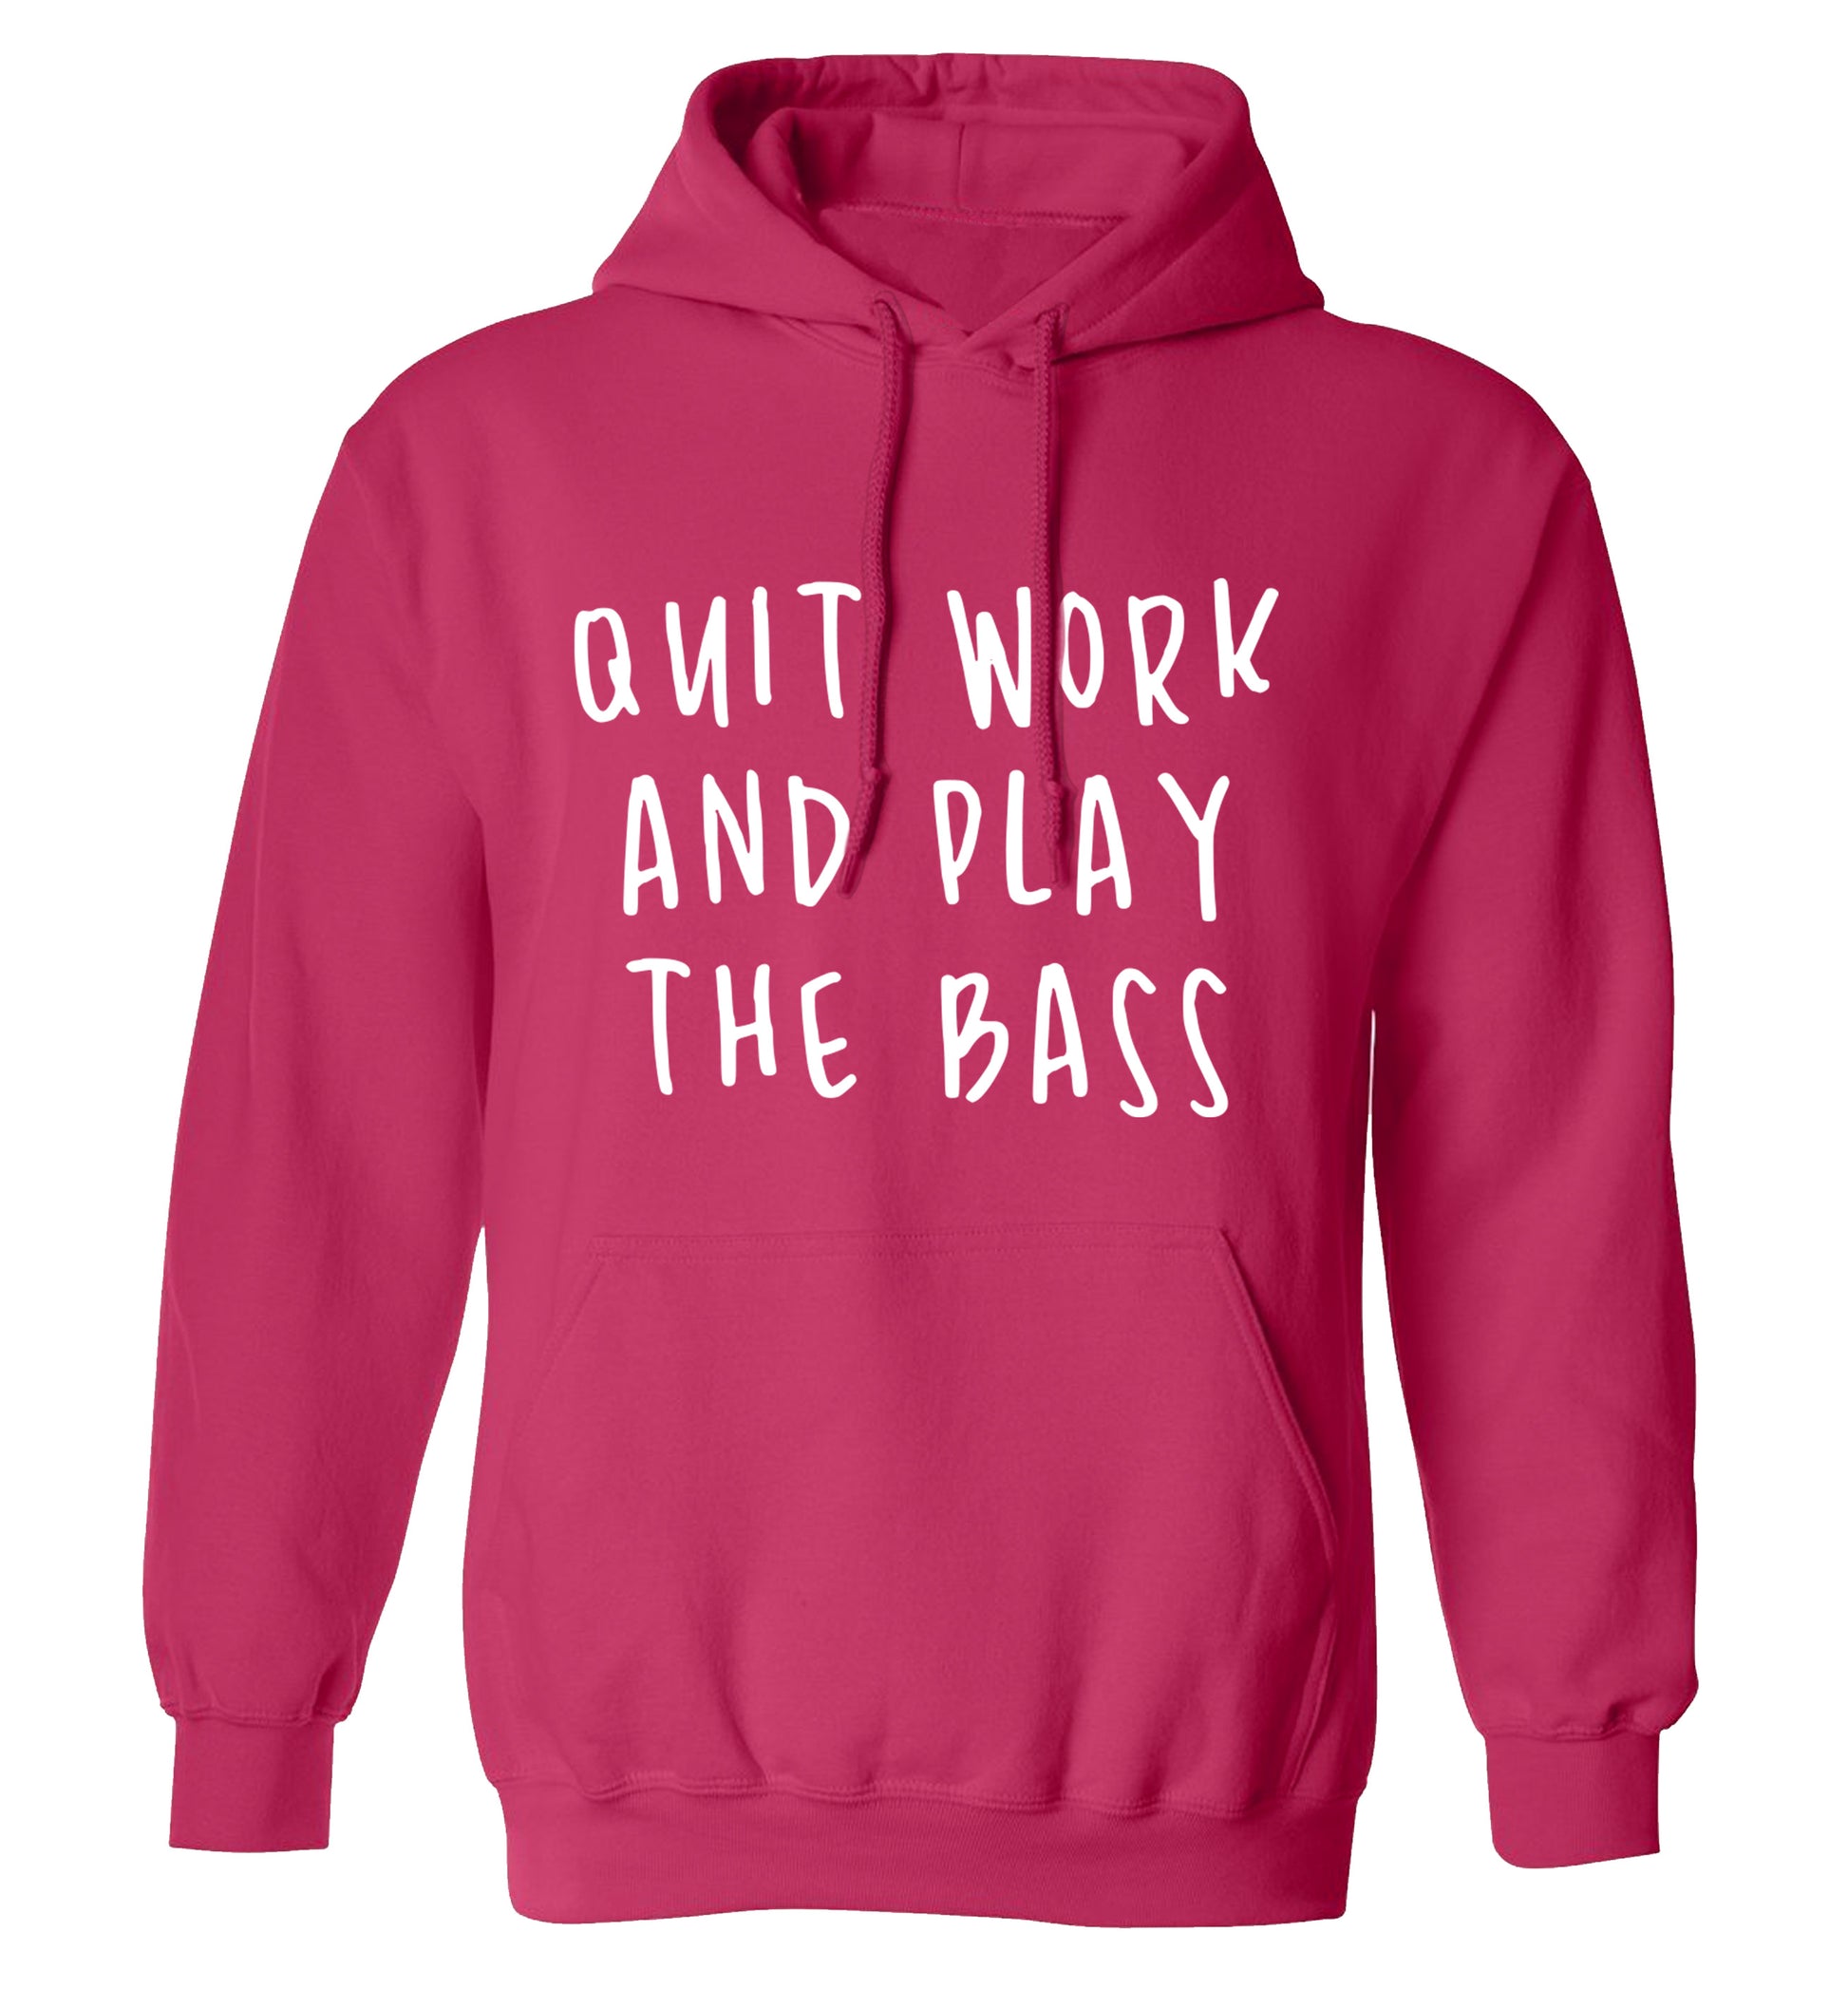 Quit work and play the bass adults unisex pink hoodie 2XL